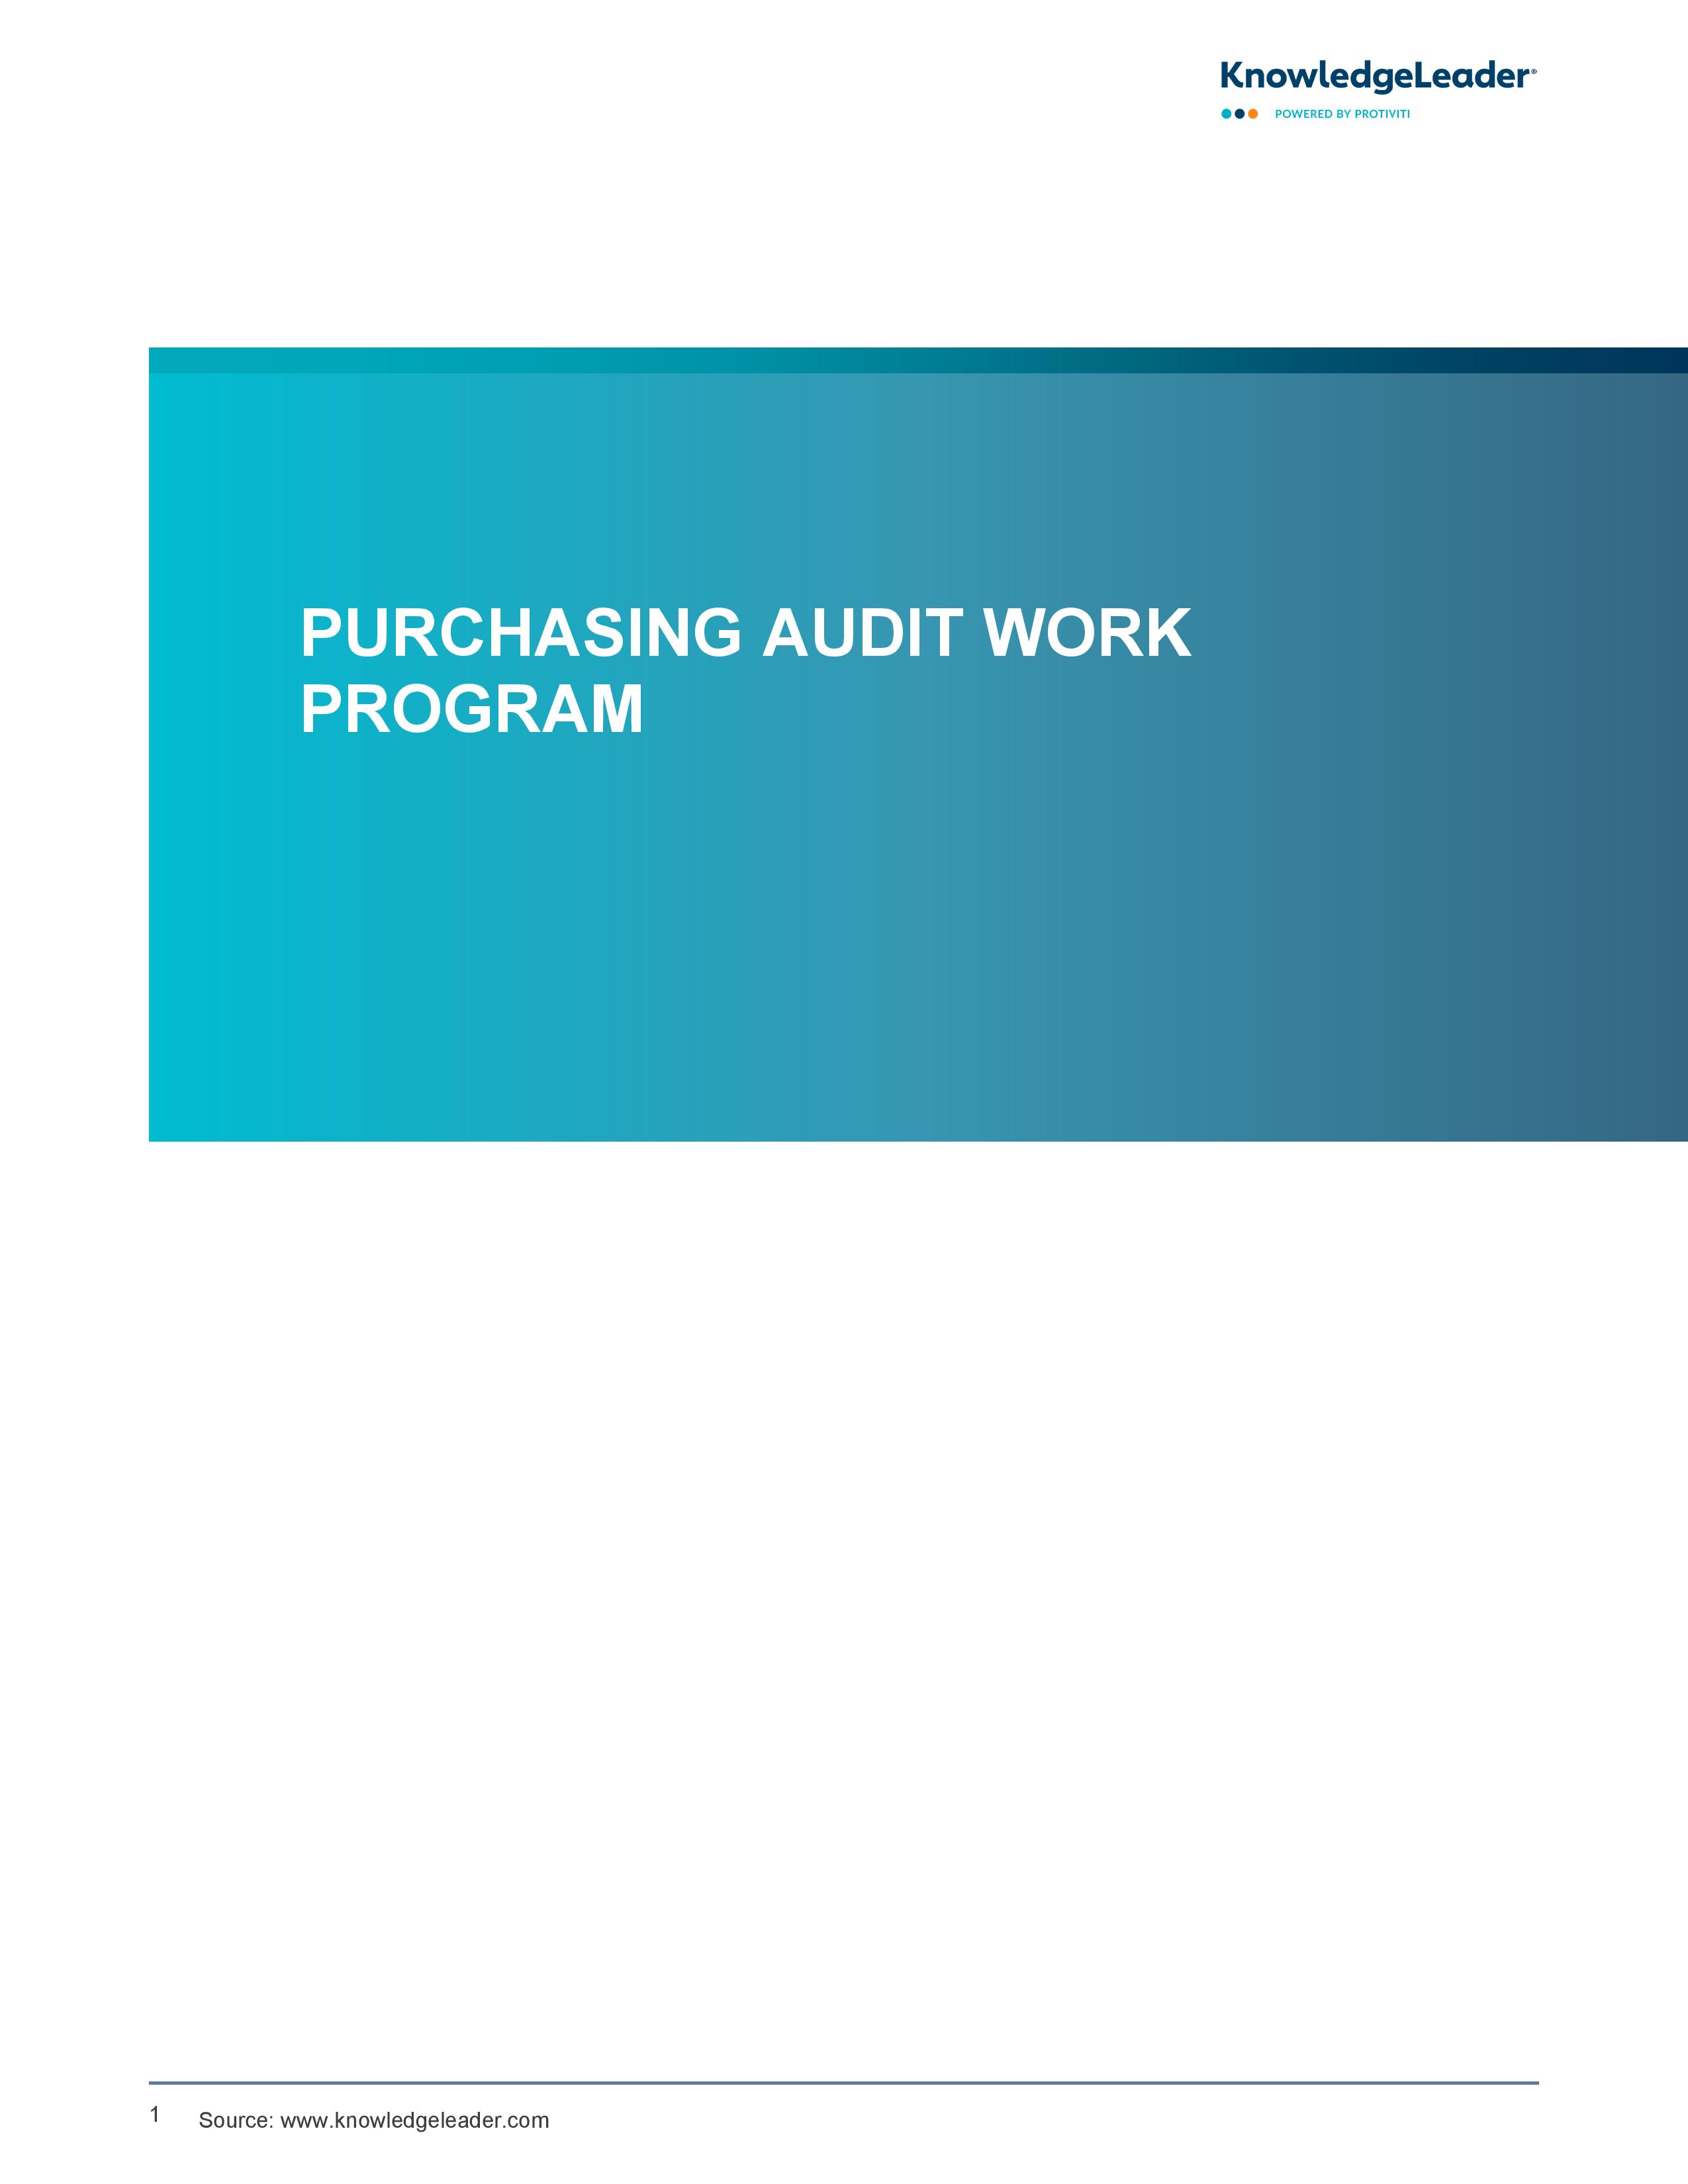 screenshot of the first page of Purchasing Audit Work Program